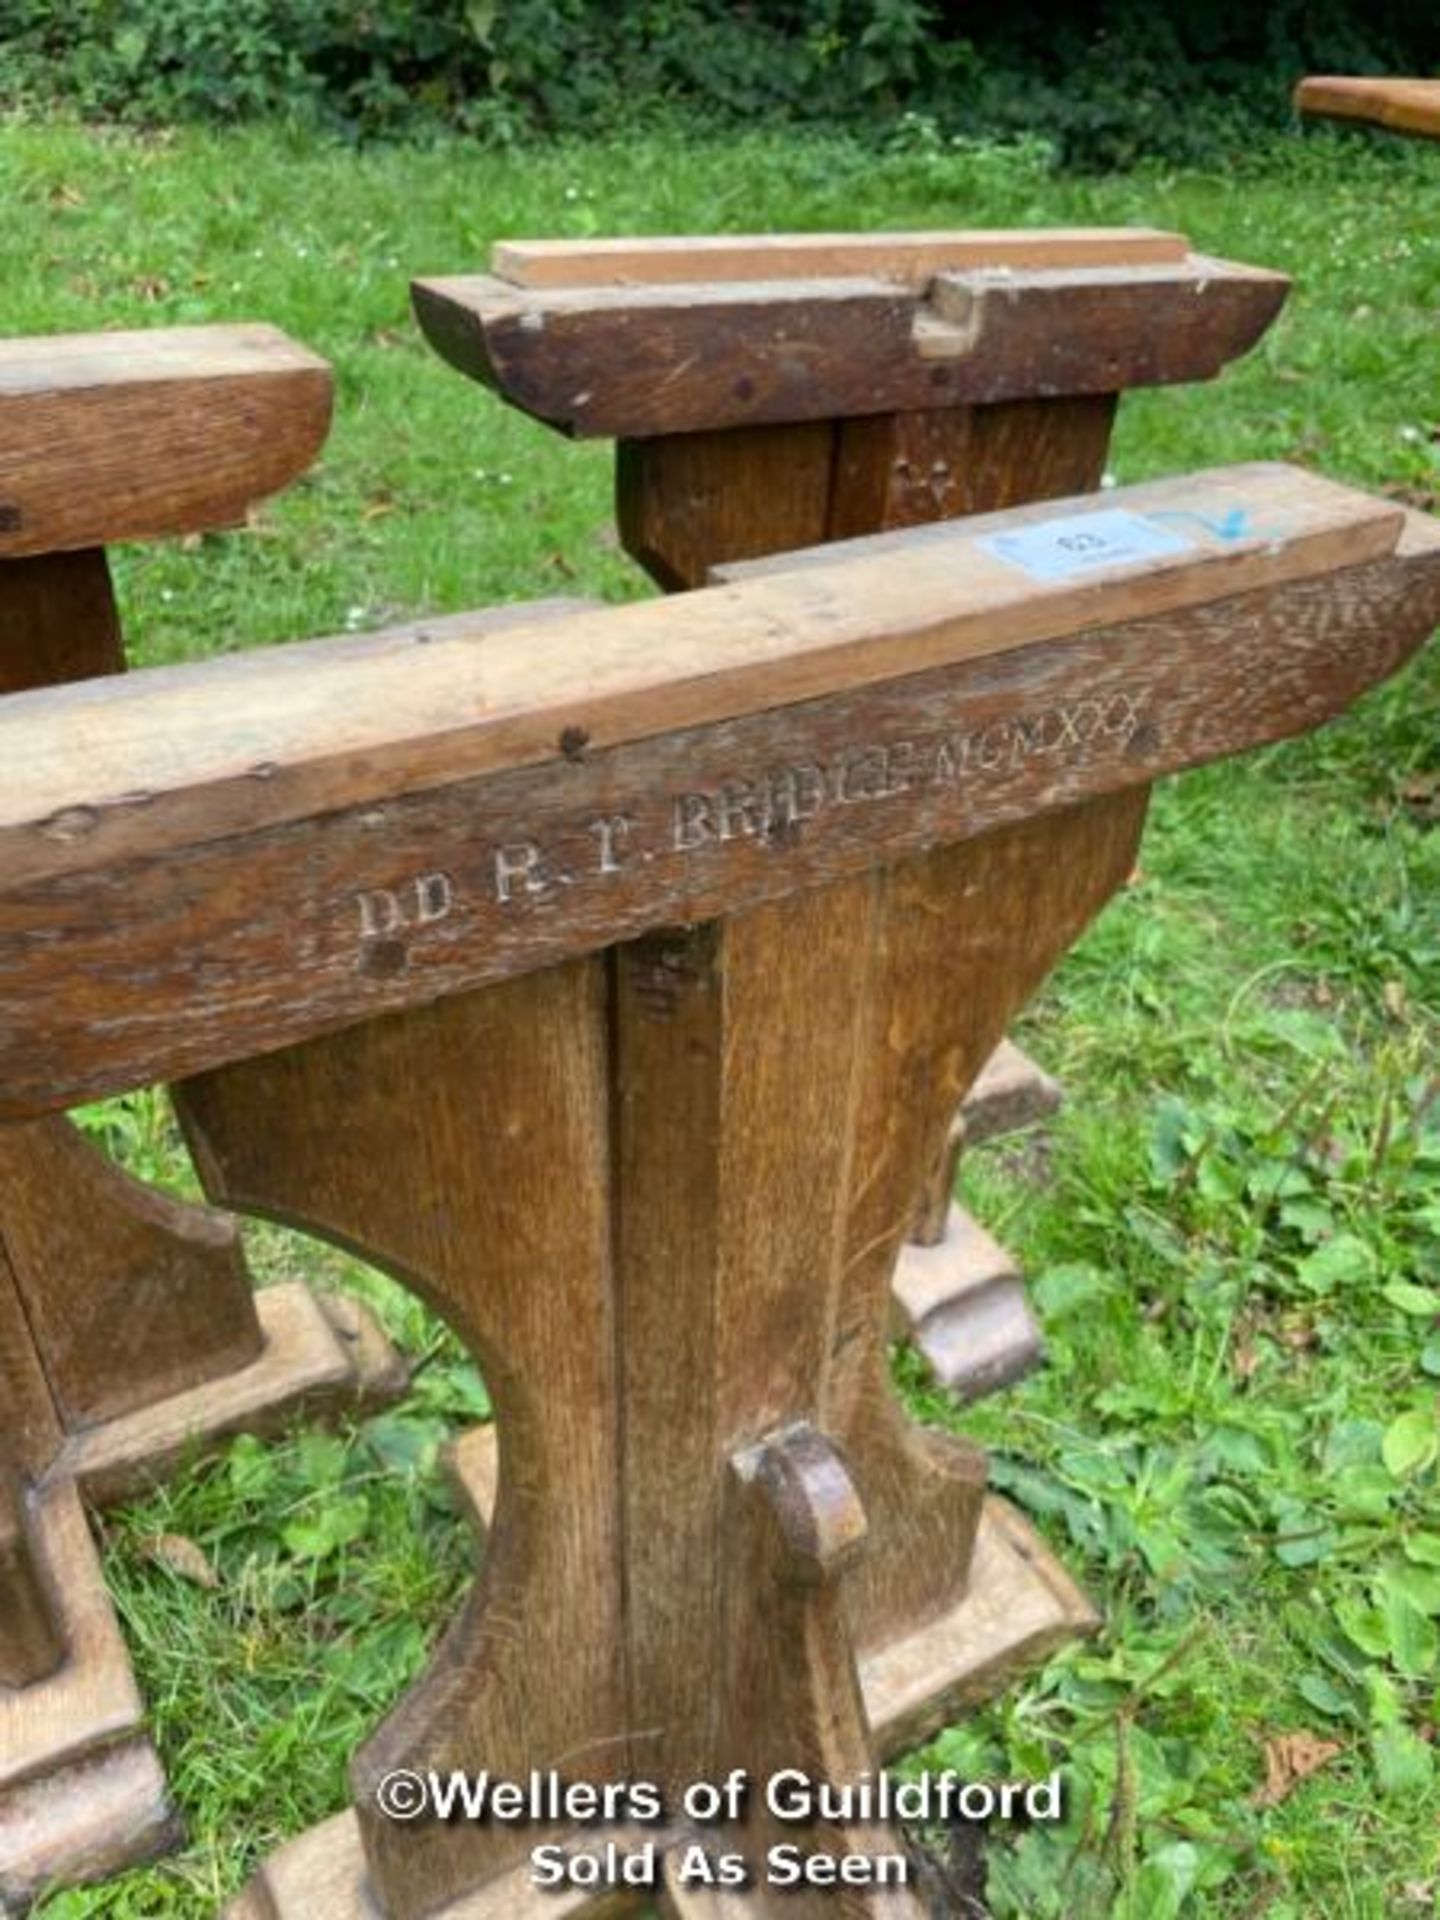 *SET OF THREE OAK REFECTORY TABLE BASES - 69CM H X 56CM W - POSSIBLY MATCHES THE TABLE TOP IN LOT 67 - Image 2 of 2